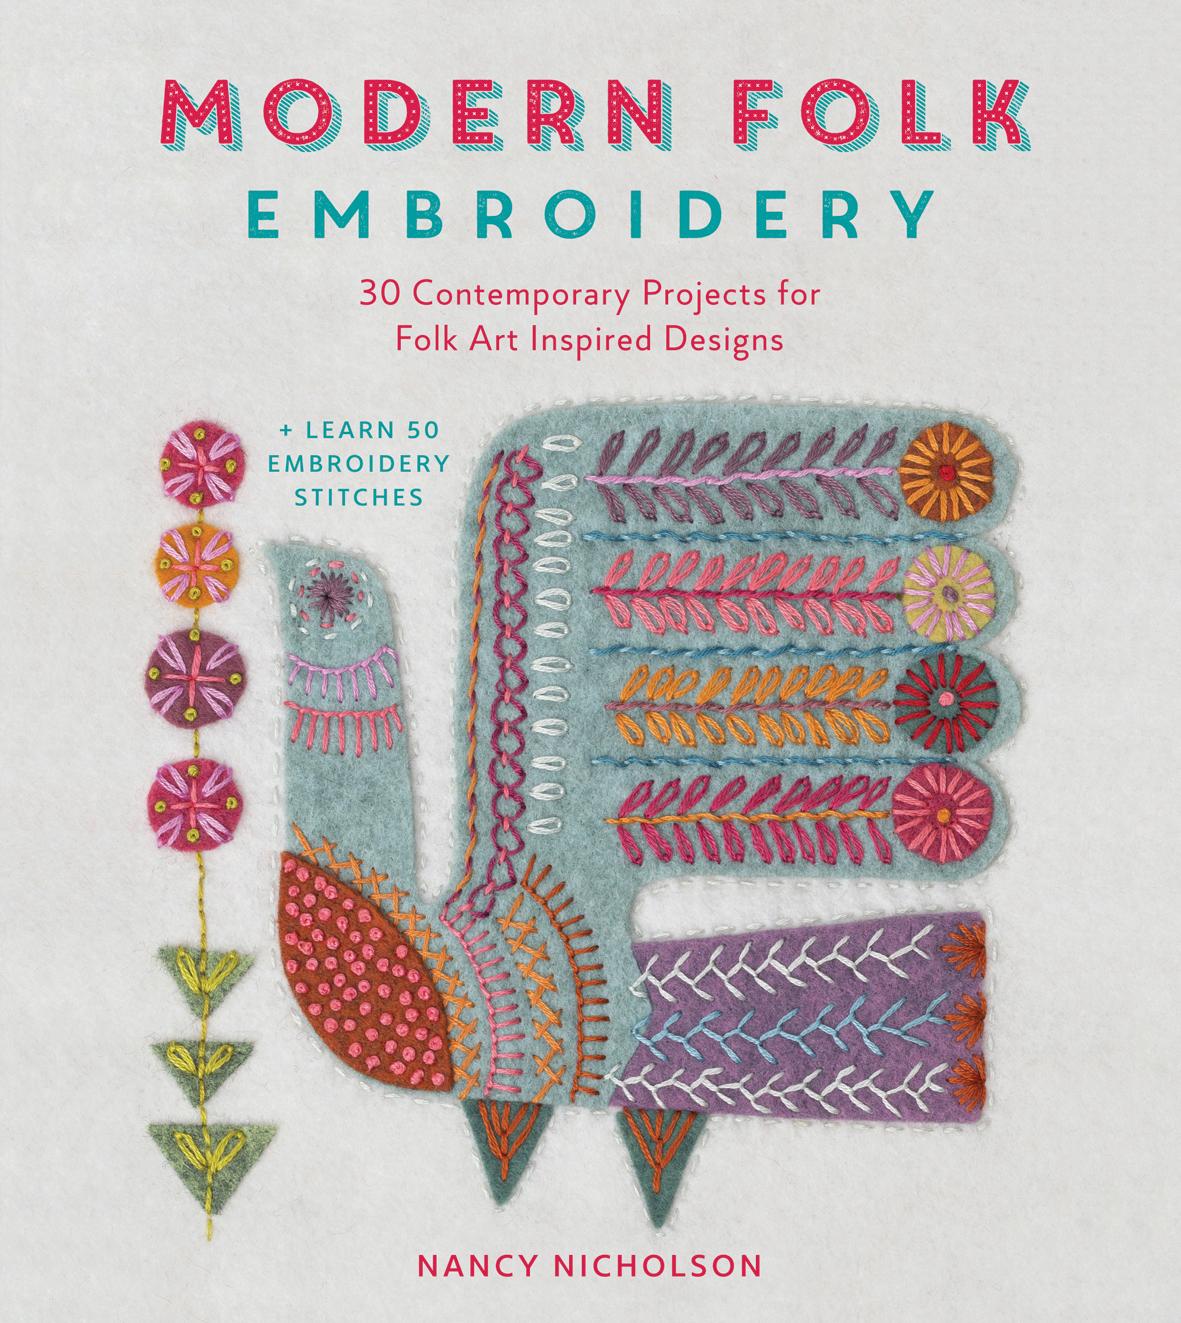 MODERN FOLK EMBROIDERY 30 CONTEMPORARY PROJECTS